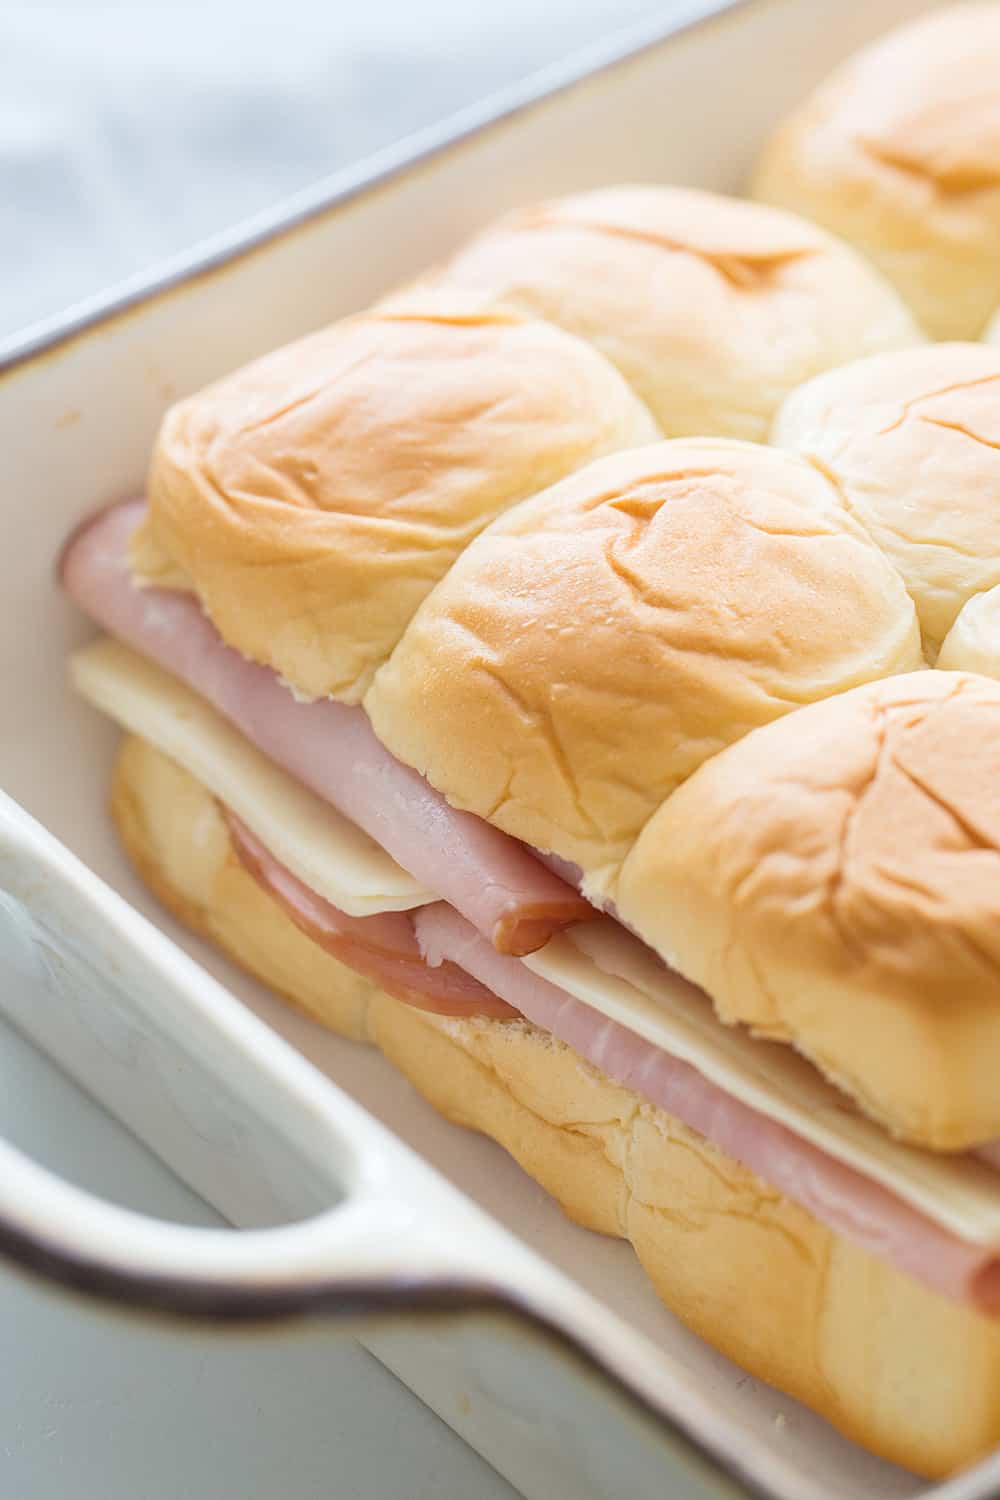 Hawaiian Ham & Cheese Sliders - Need a tasty way to use leftover ham or a recipe that'll feed a crowd? Look no further than Hawaiian ham and cheese sliders!